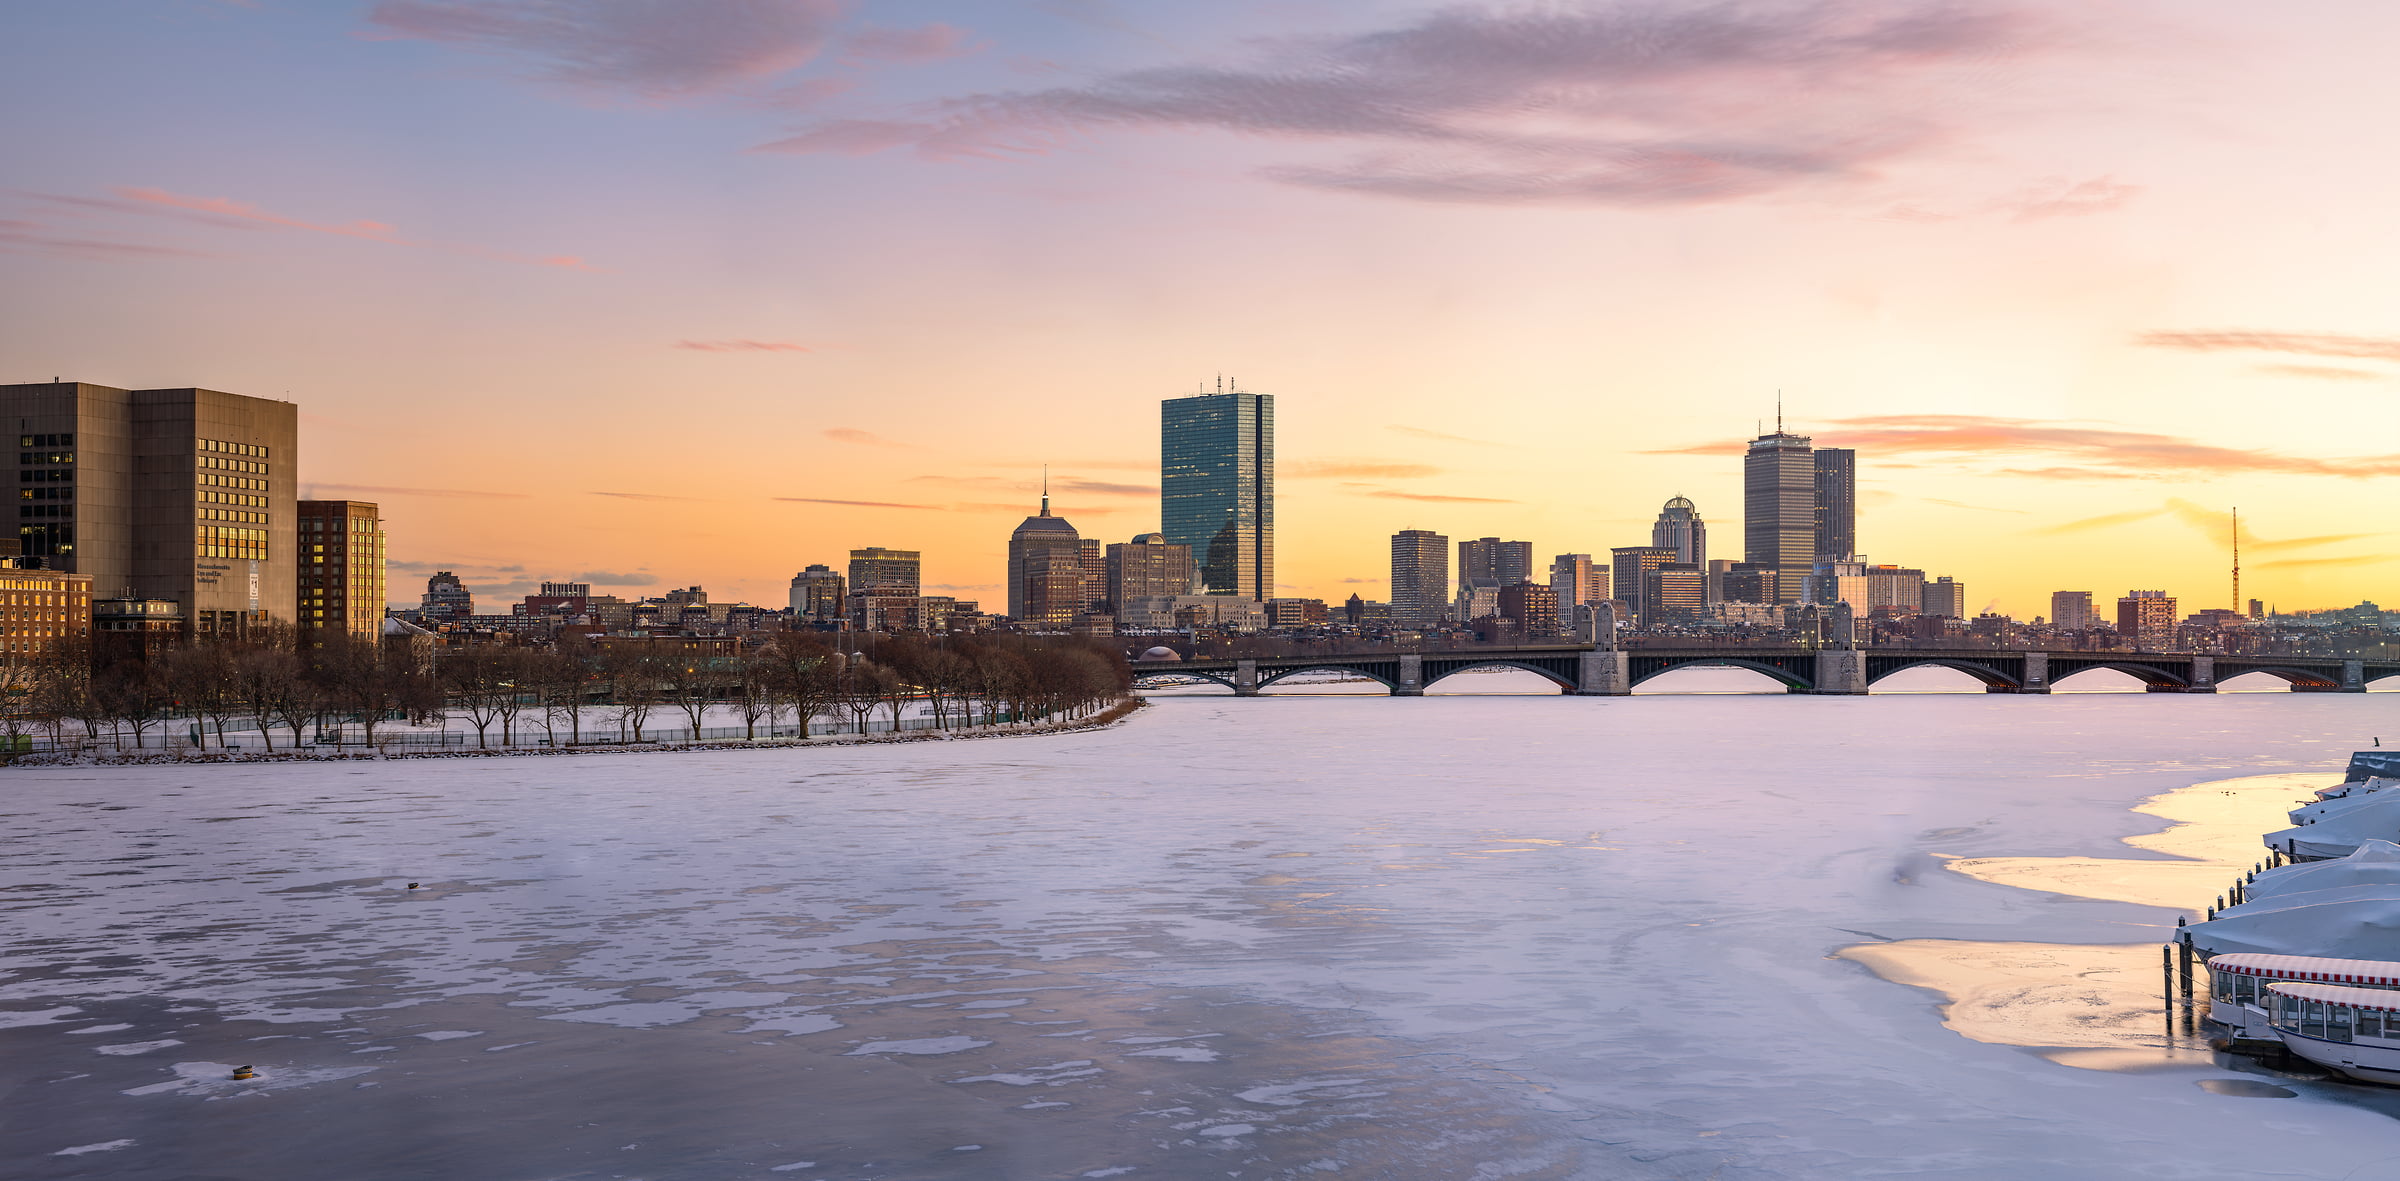 1,159 megapixels! A very high resolution, large-format VAST photo print of the Boston skyline at sunset in winter with the Charles River frozen; cityscape photograph created by Chris Blake in Boston, Massachusetts.